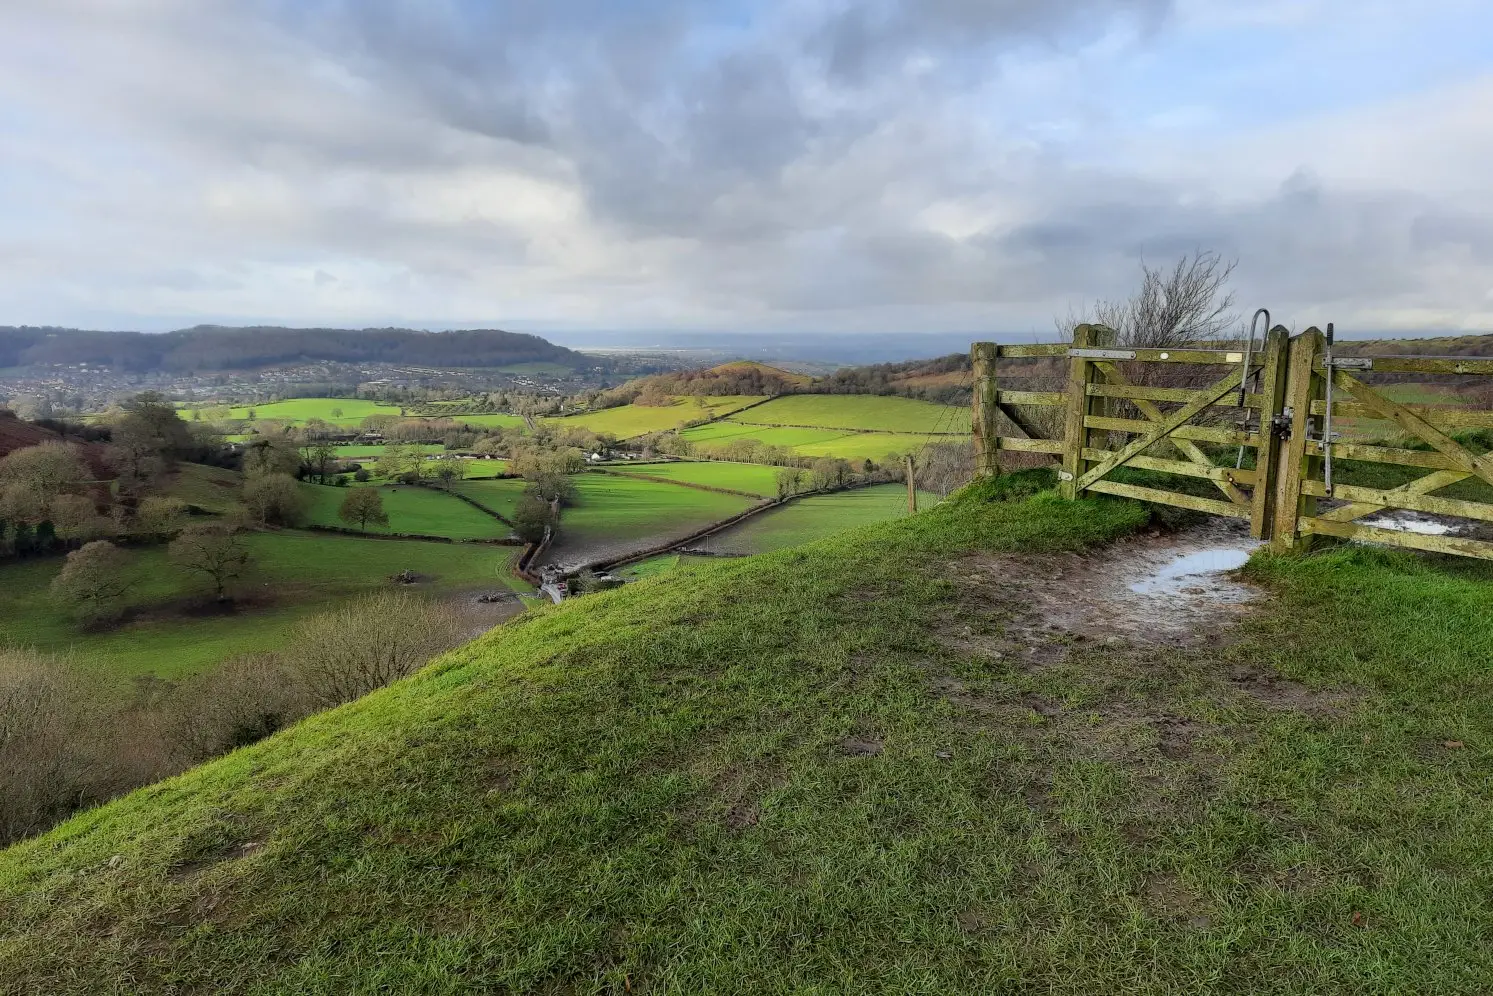 Country views from Uley Bury, one of the best Cotswold walks near Bath and Bristol